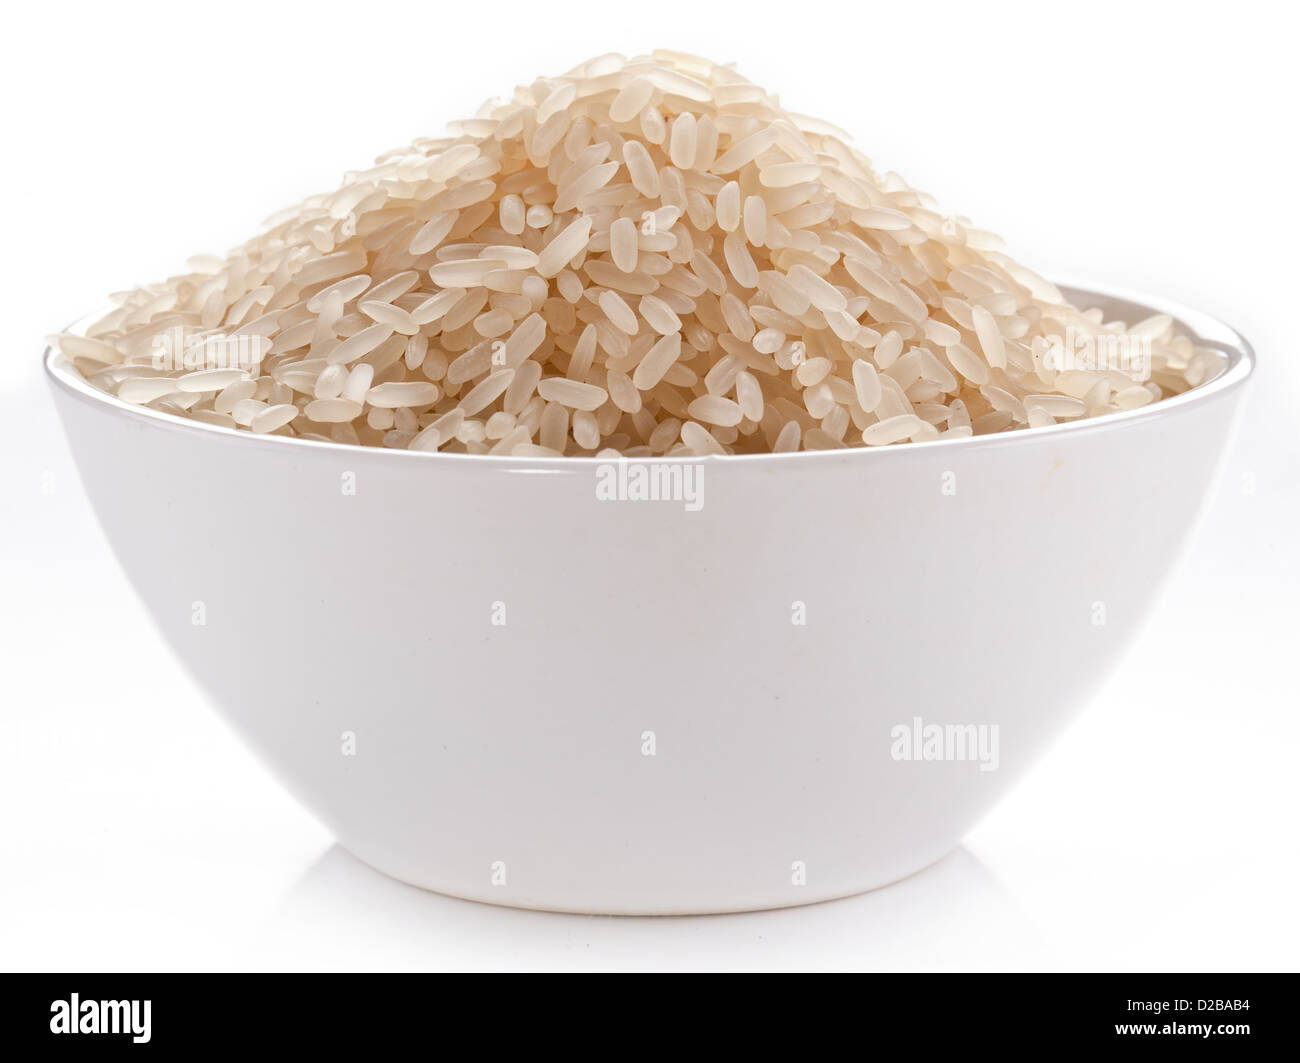 Uncooked rice in a bowl on a white background. Stock Photo